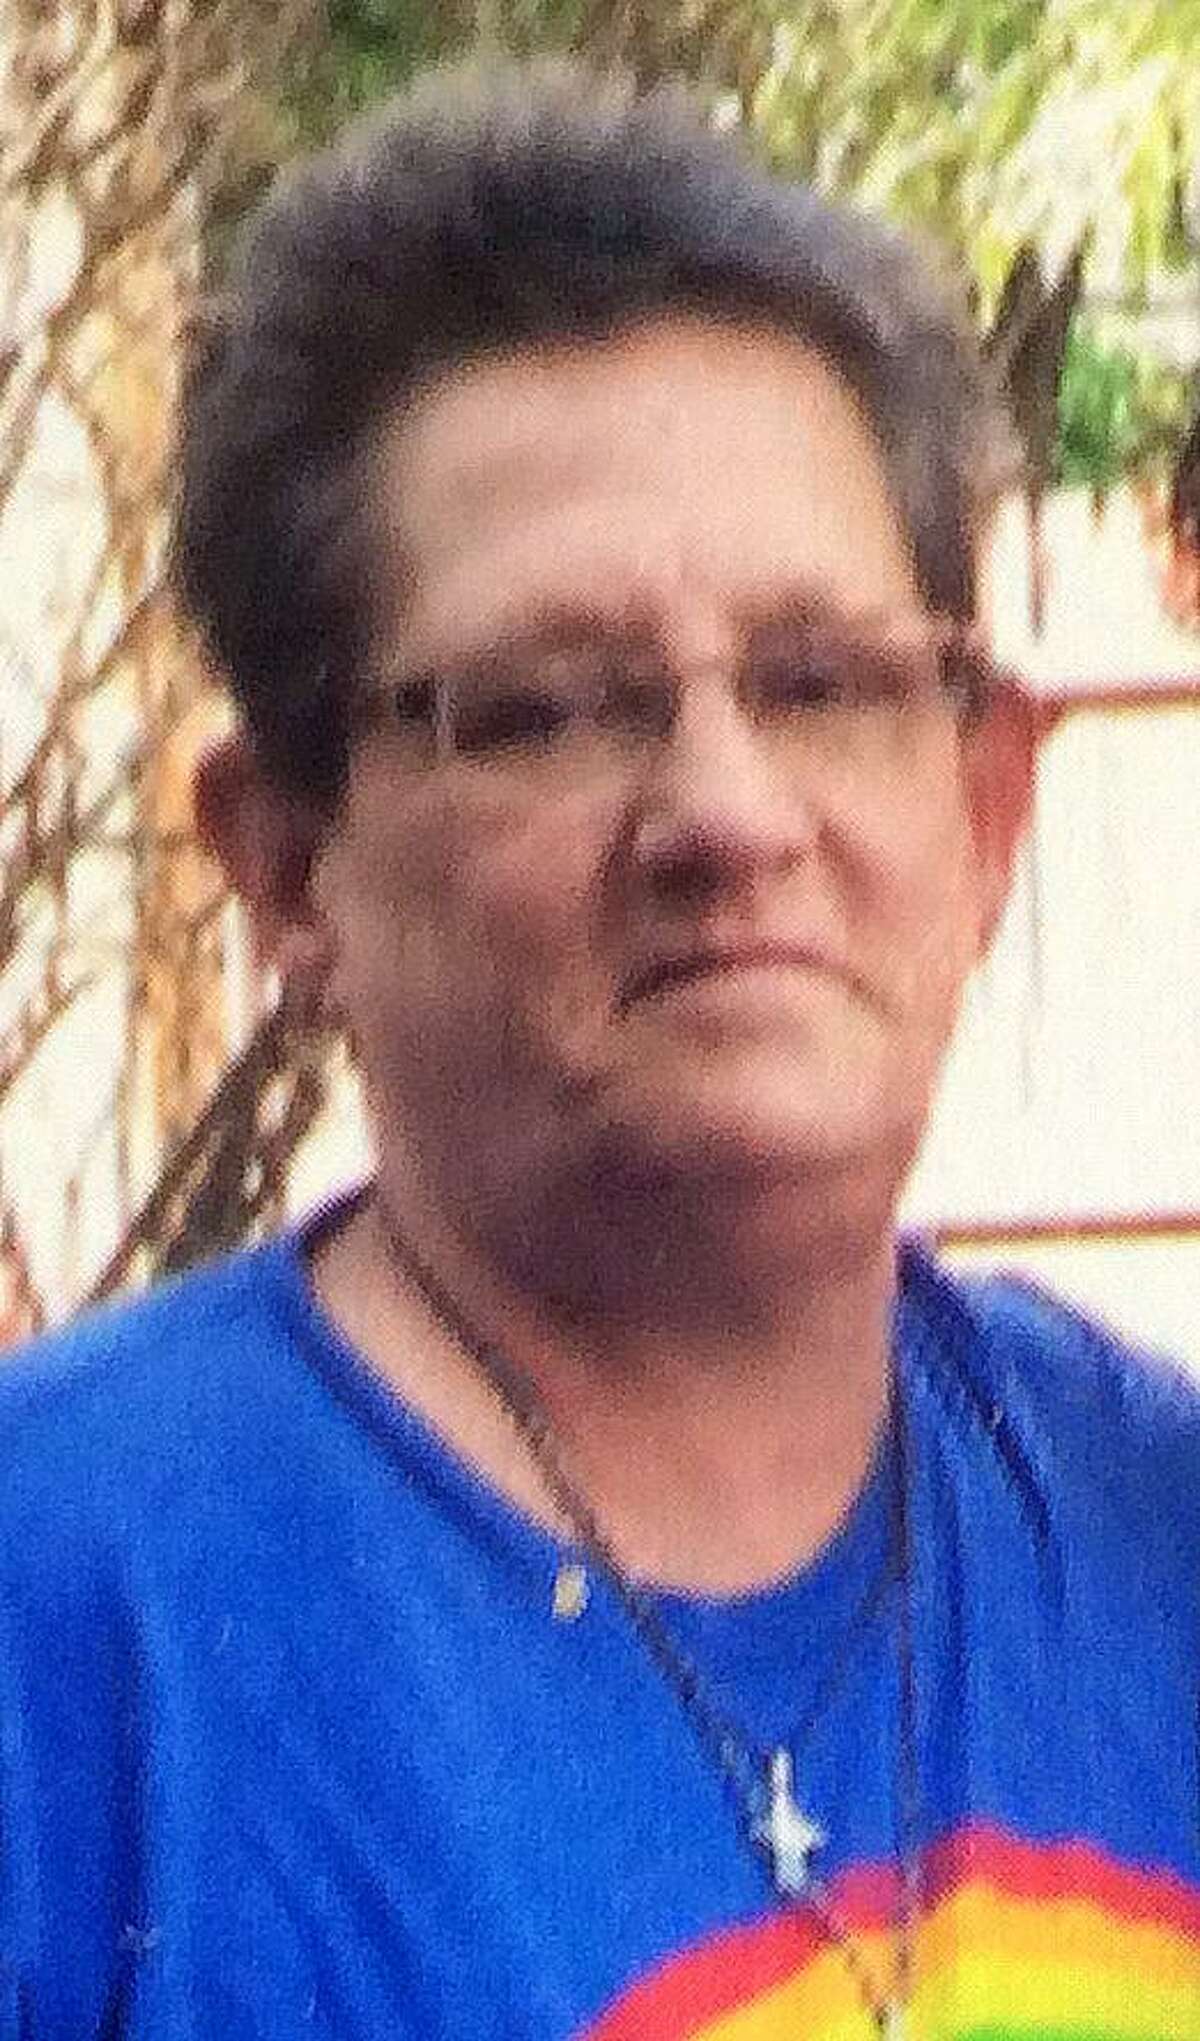 Susan Tomczyk, 61, of Bridgeport, has been identified as the victim in a hit and run by a suspect who was speeding along Railroad Avenue in an attempt to elude State Police on in the city on Thursday, August 10, 2017.